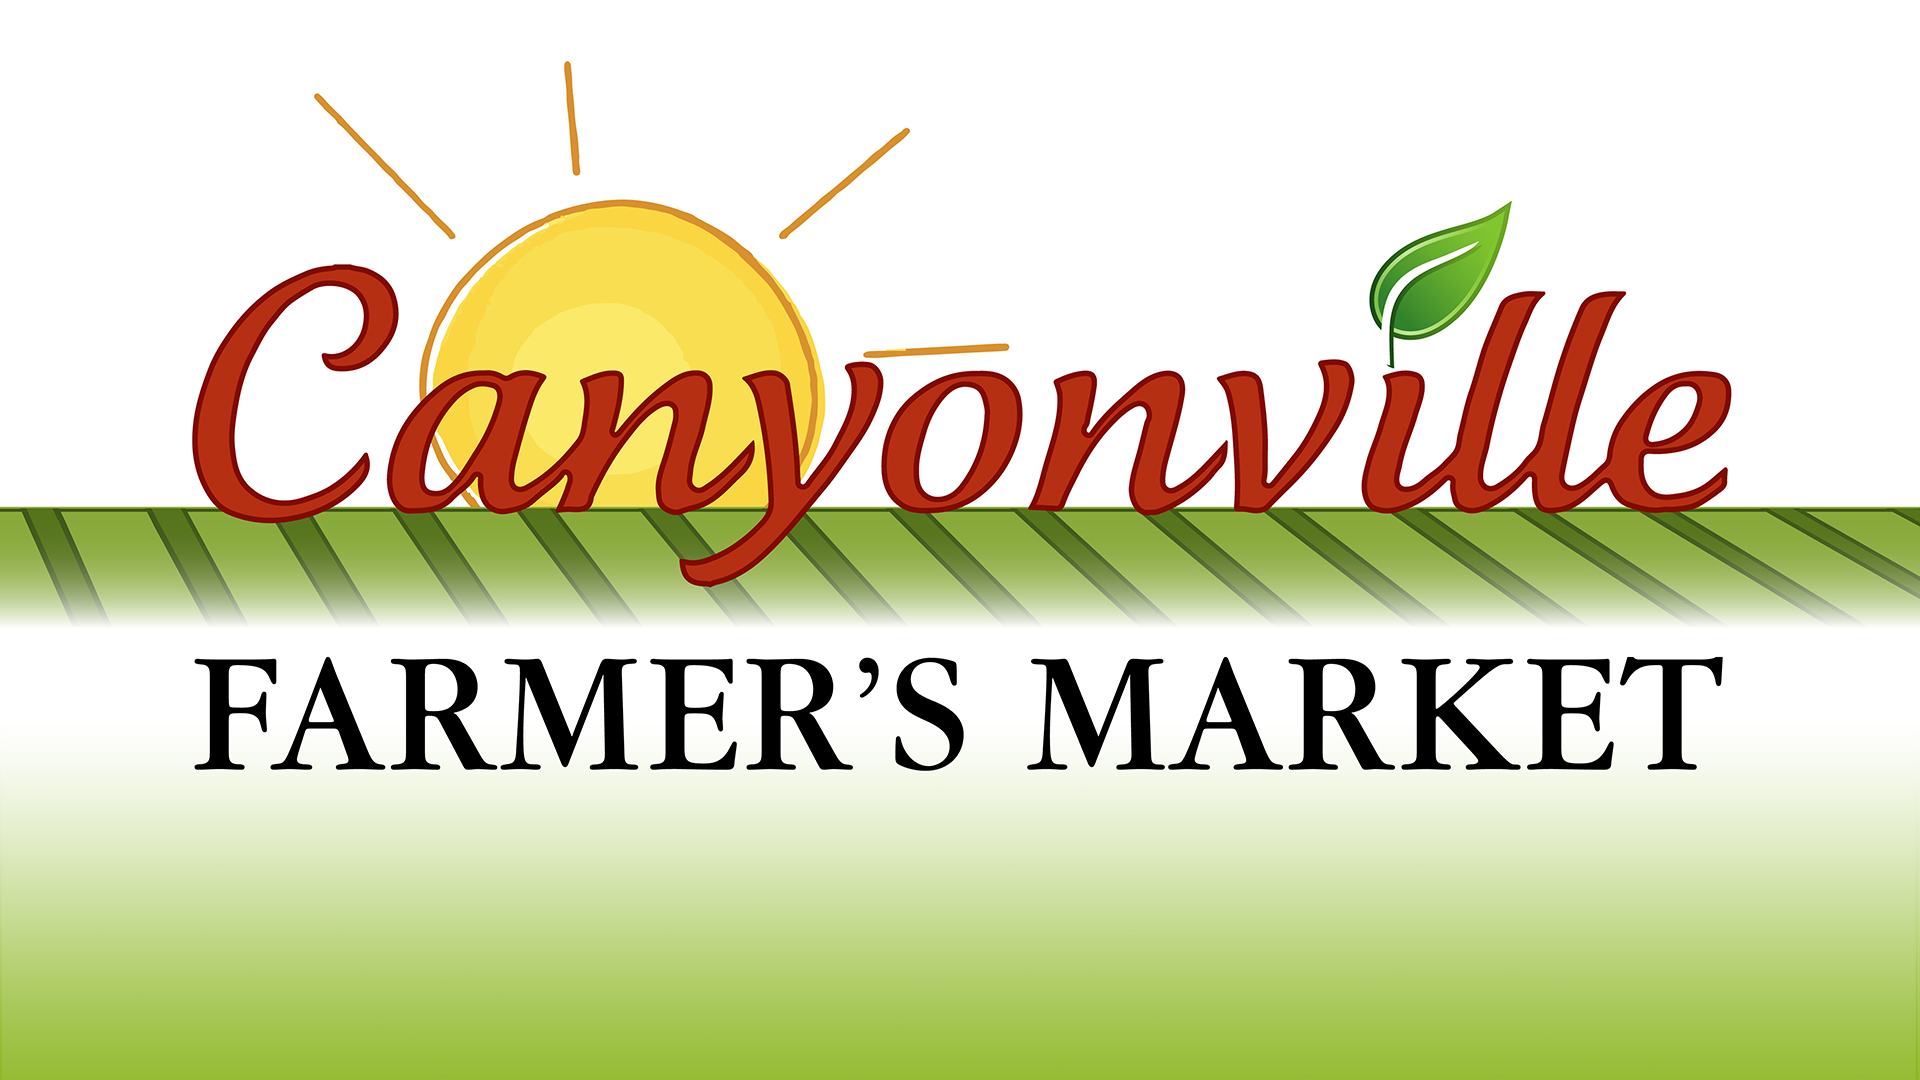 Visit The Canyonville Farmer's Market At Seven Feathers Casino Resort